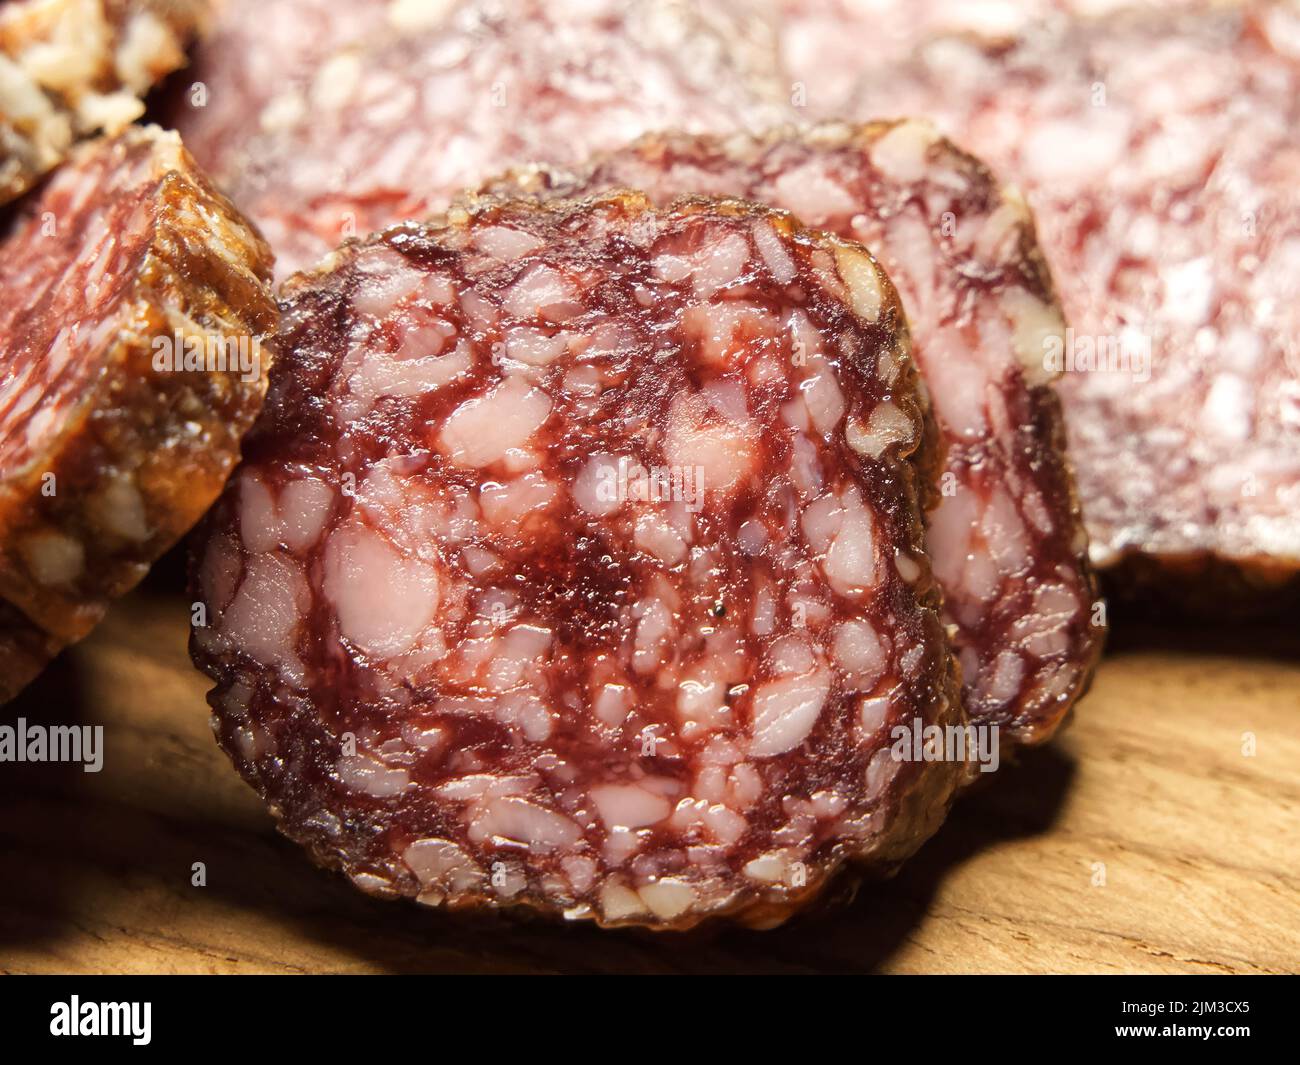 Dried sausage, close-up shot. Lots of sausage slices. Stock Photo